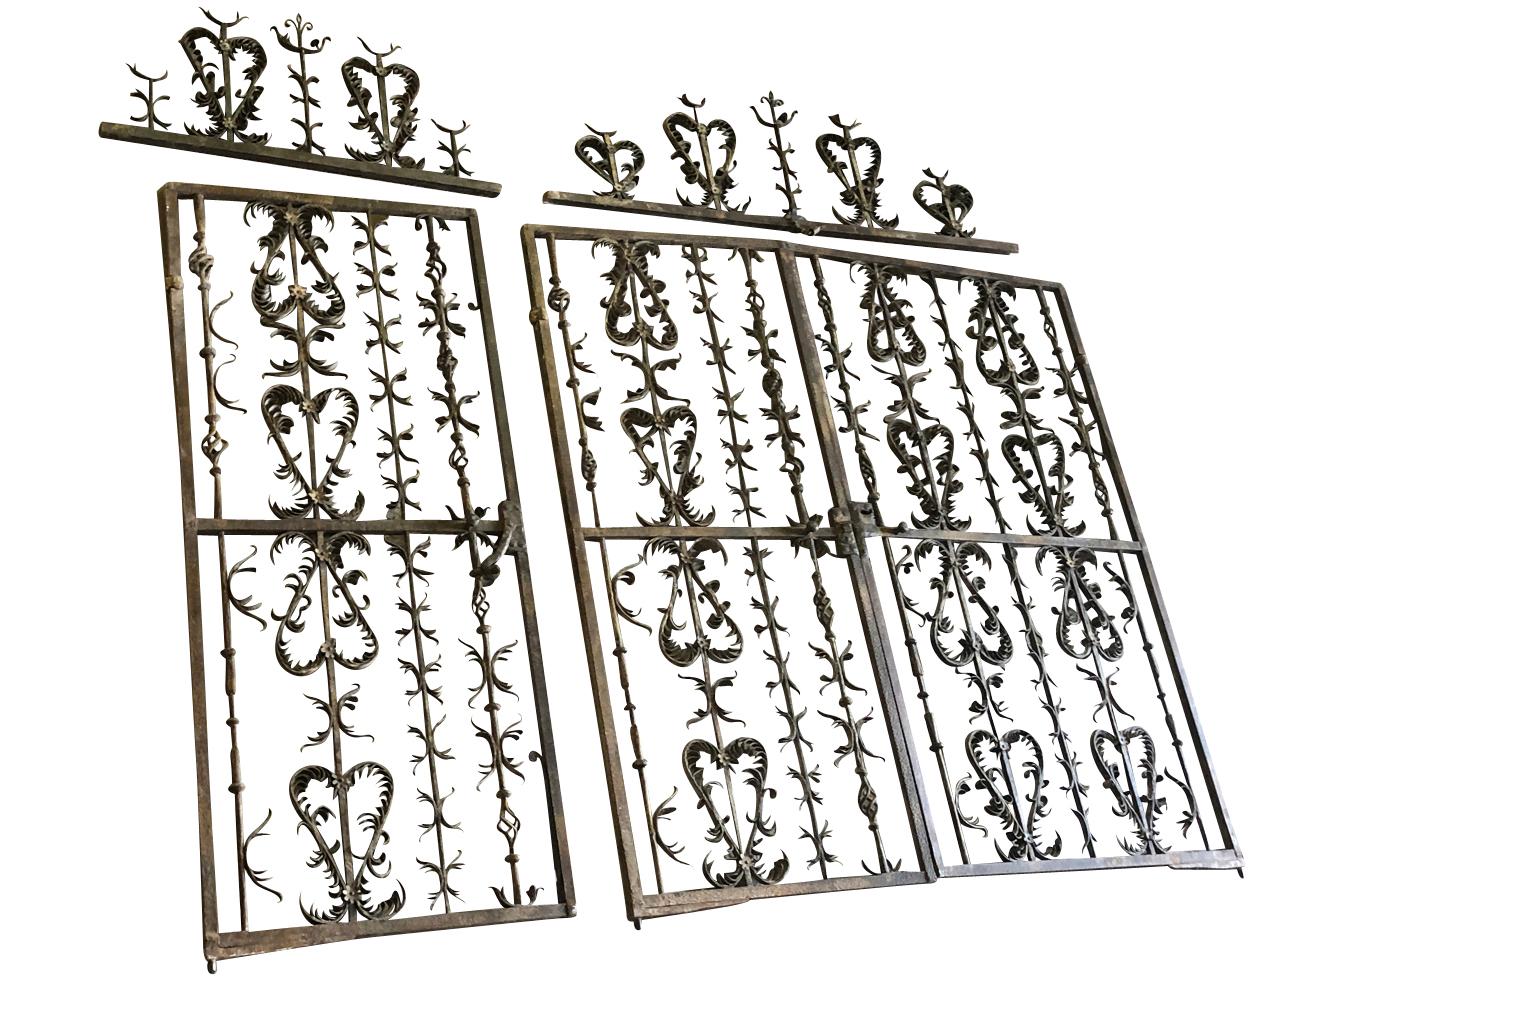 An exceptional and tremendous set of late 16th-early 17th century entry gates in hand forged iron. Exquisite craftsmanship. One segment measures 82 1/2